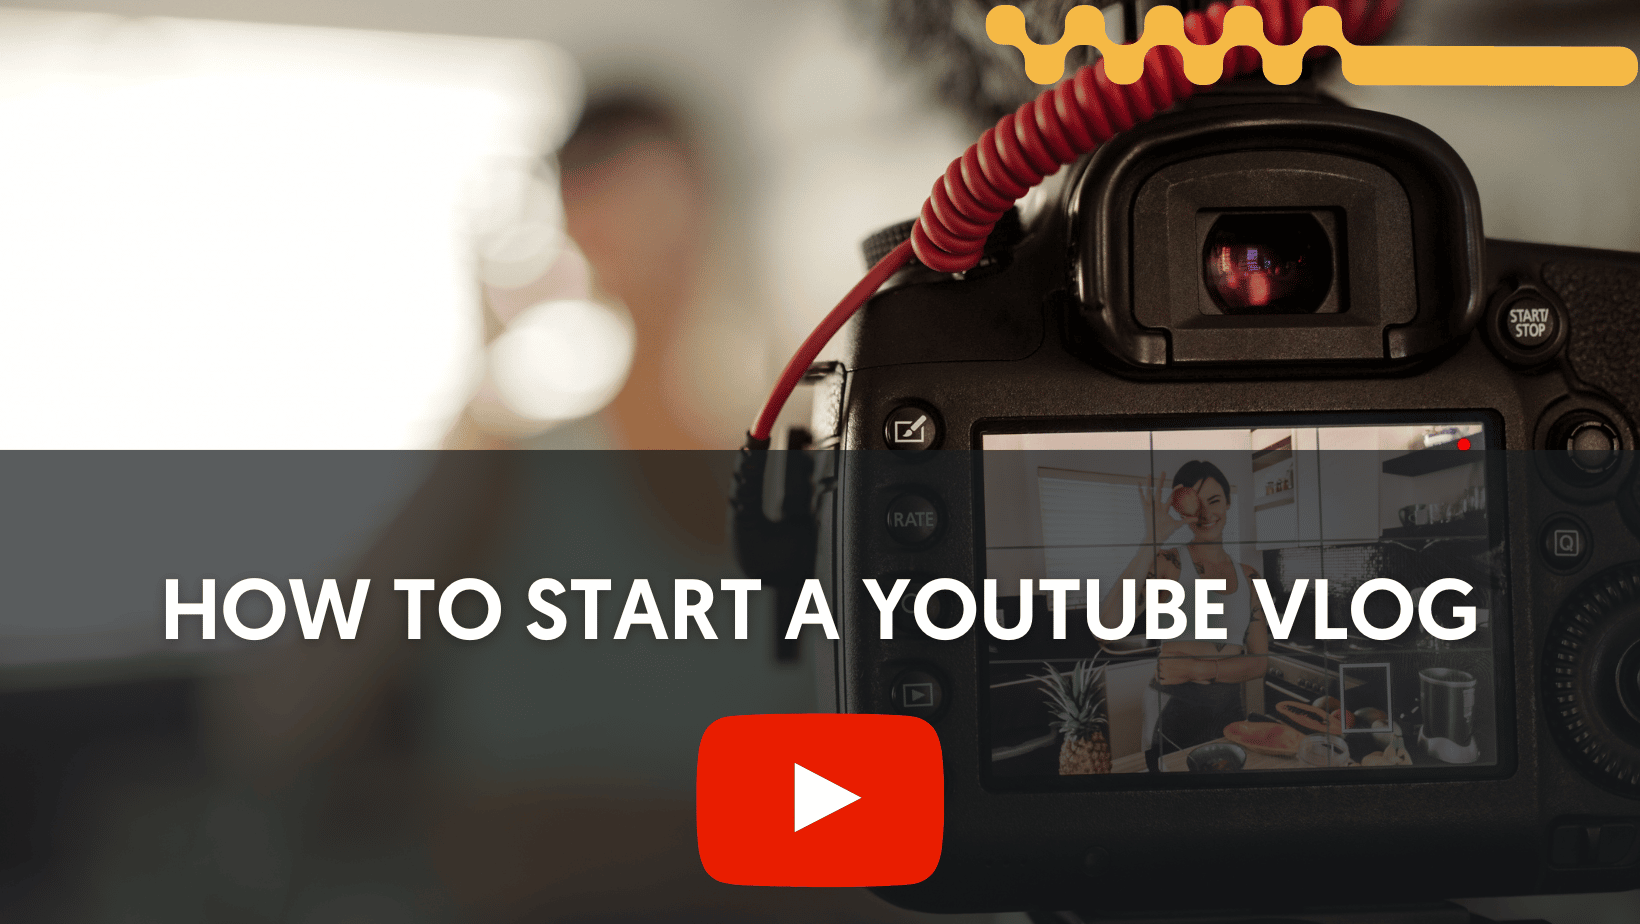 How to Start a YouTube Channel for Vlogging Like a Pro